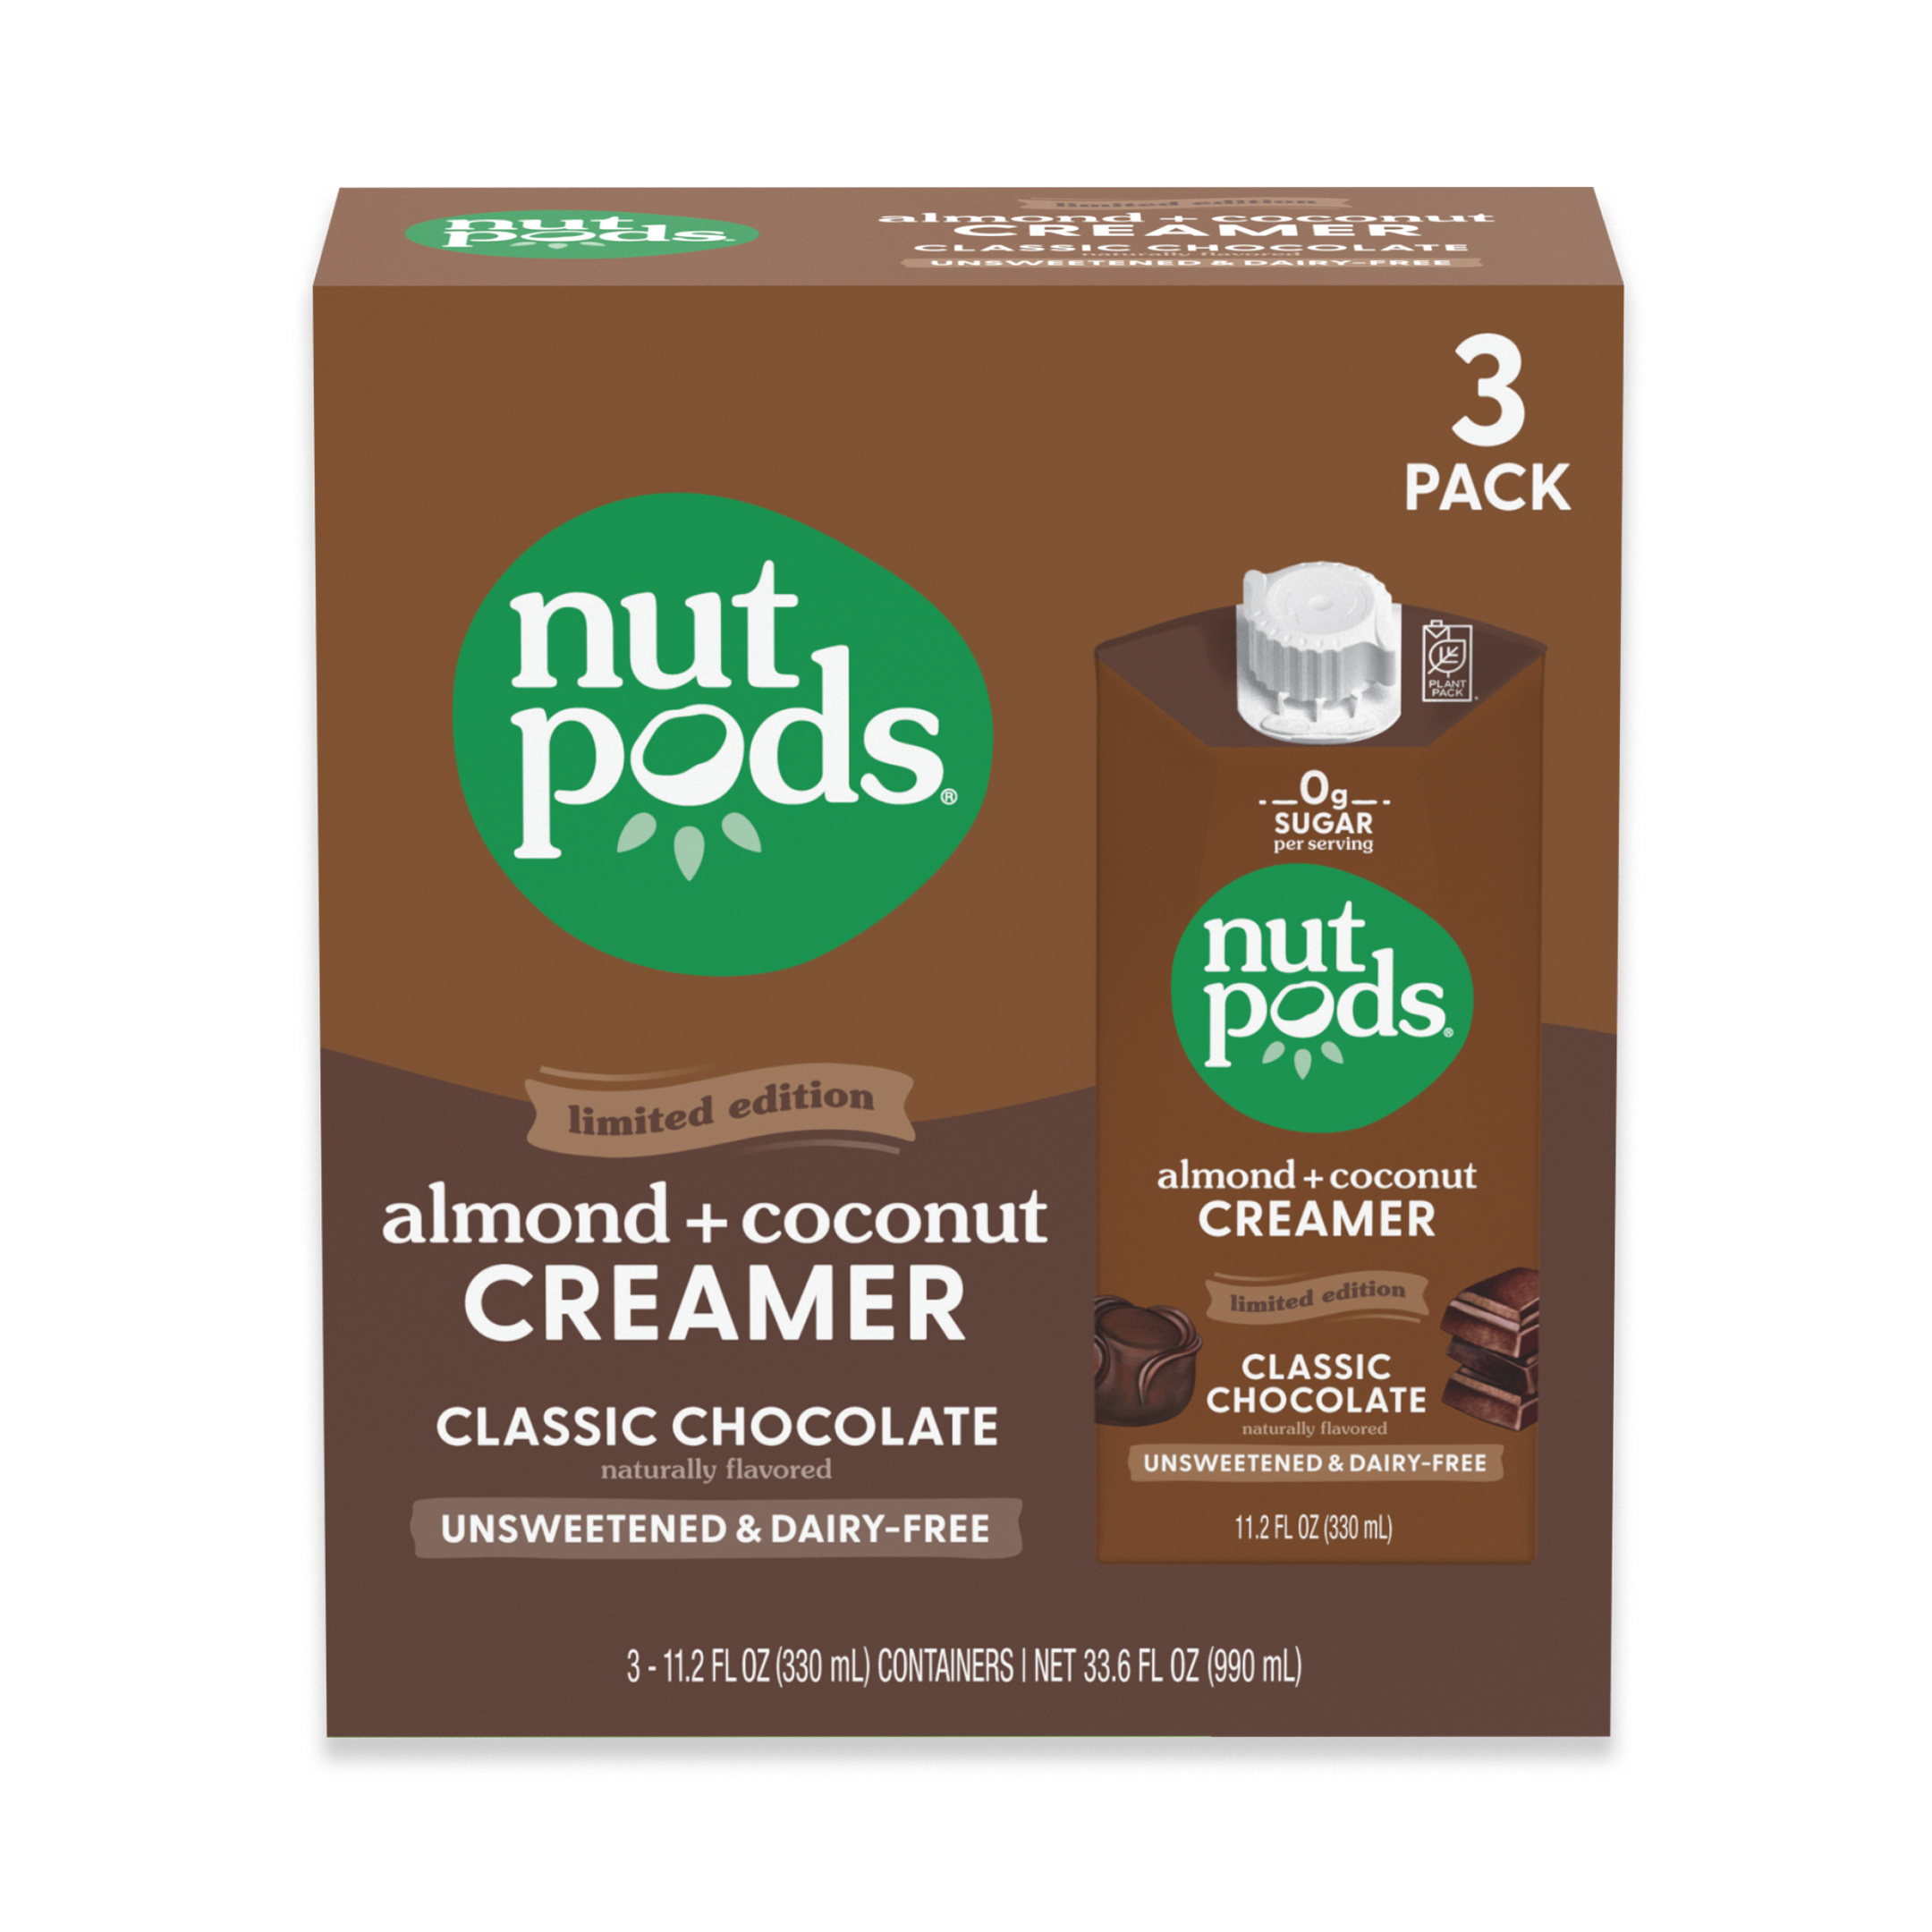 Unsweetened Almond and Coconut Classic Chocolate Creamer 3 Pack